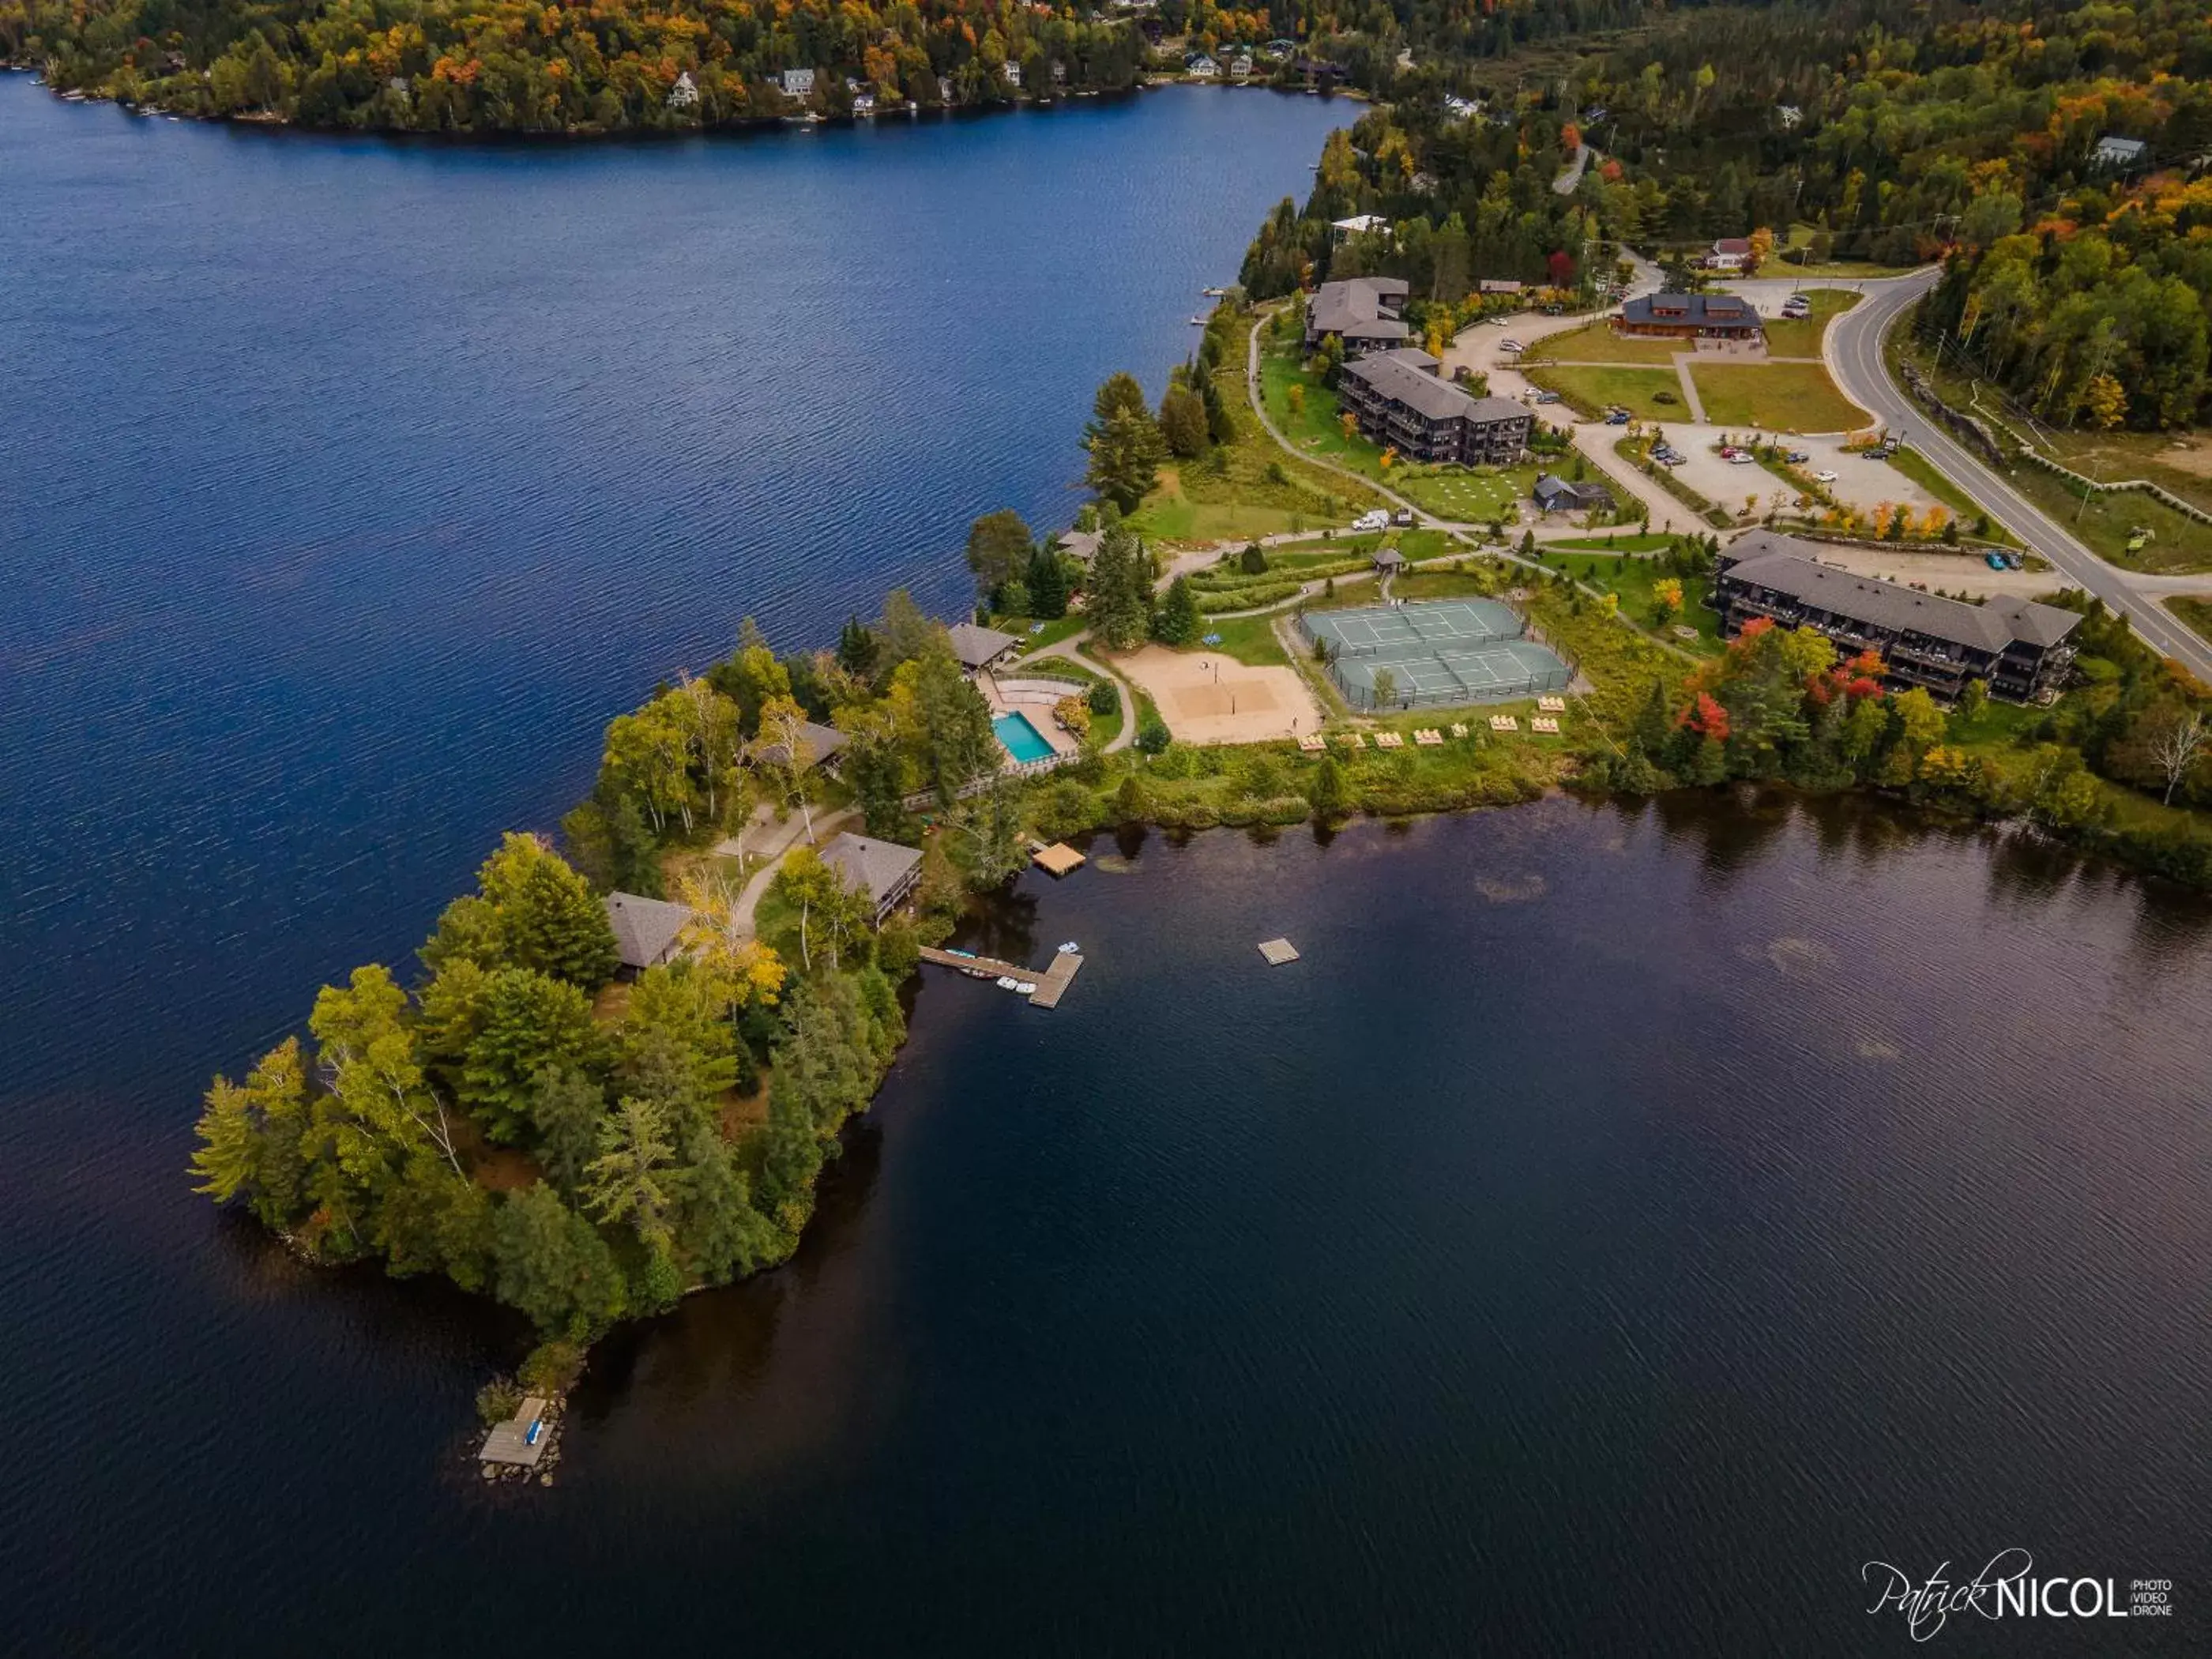 Bird's-eye View in Suites-sur-Lac